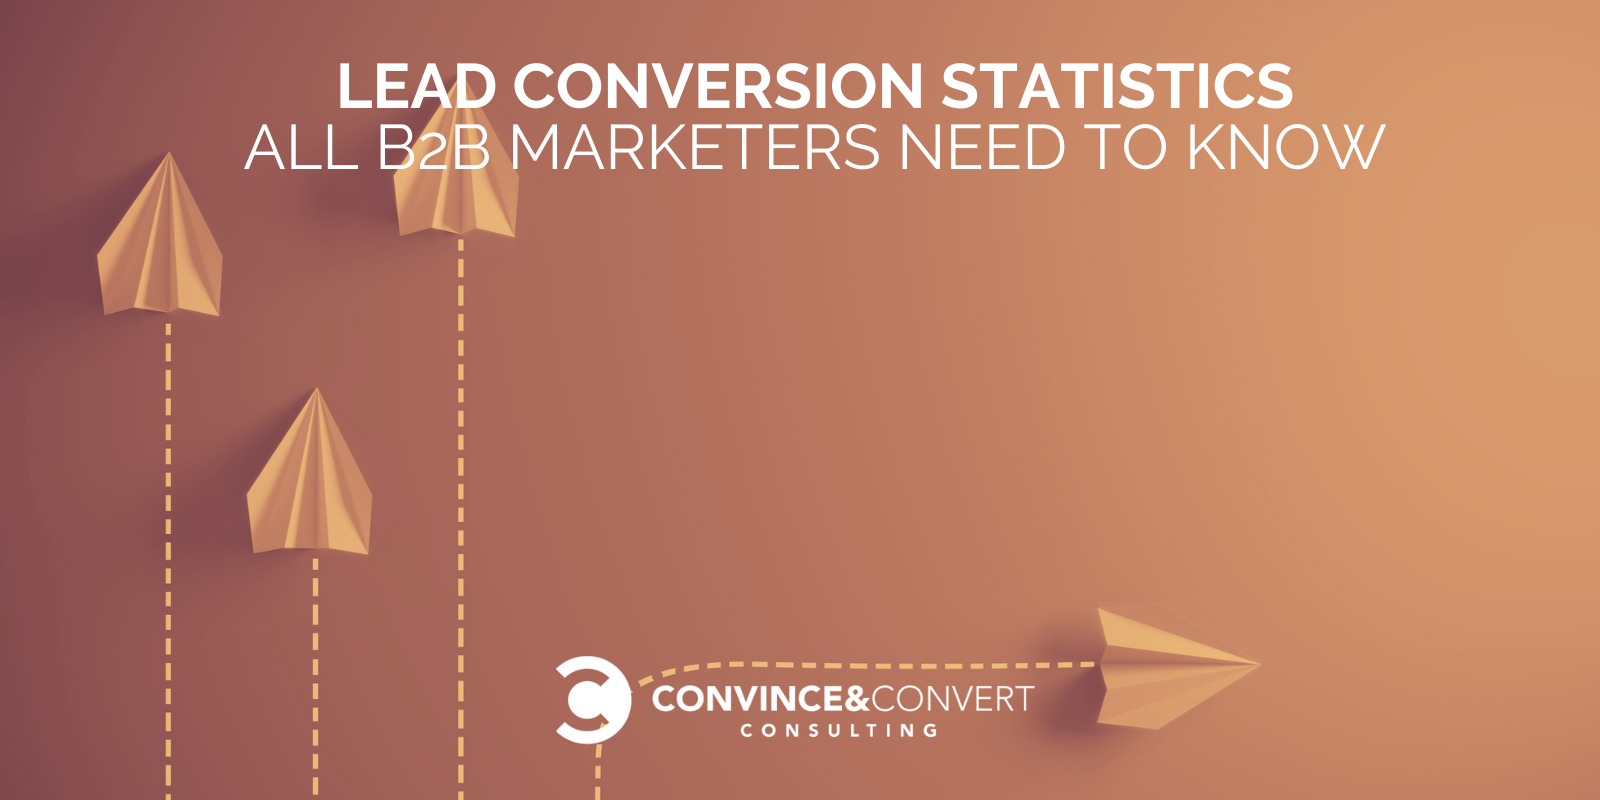 You are currently viewing Lead Conversion Statistics All B2B Marketers Need to Know